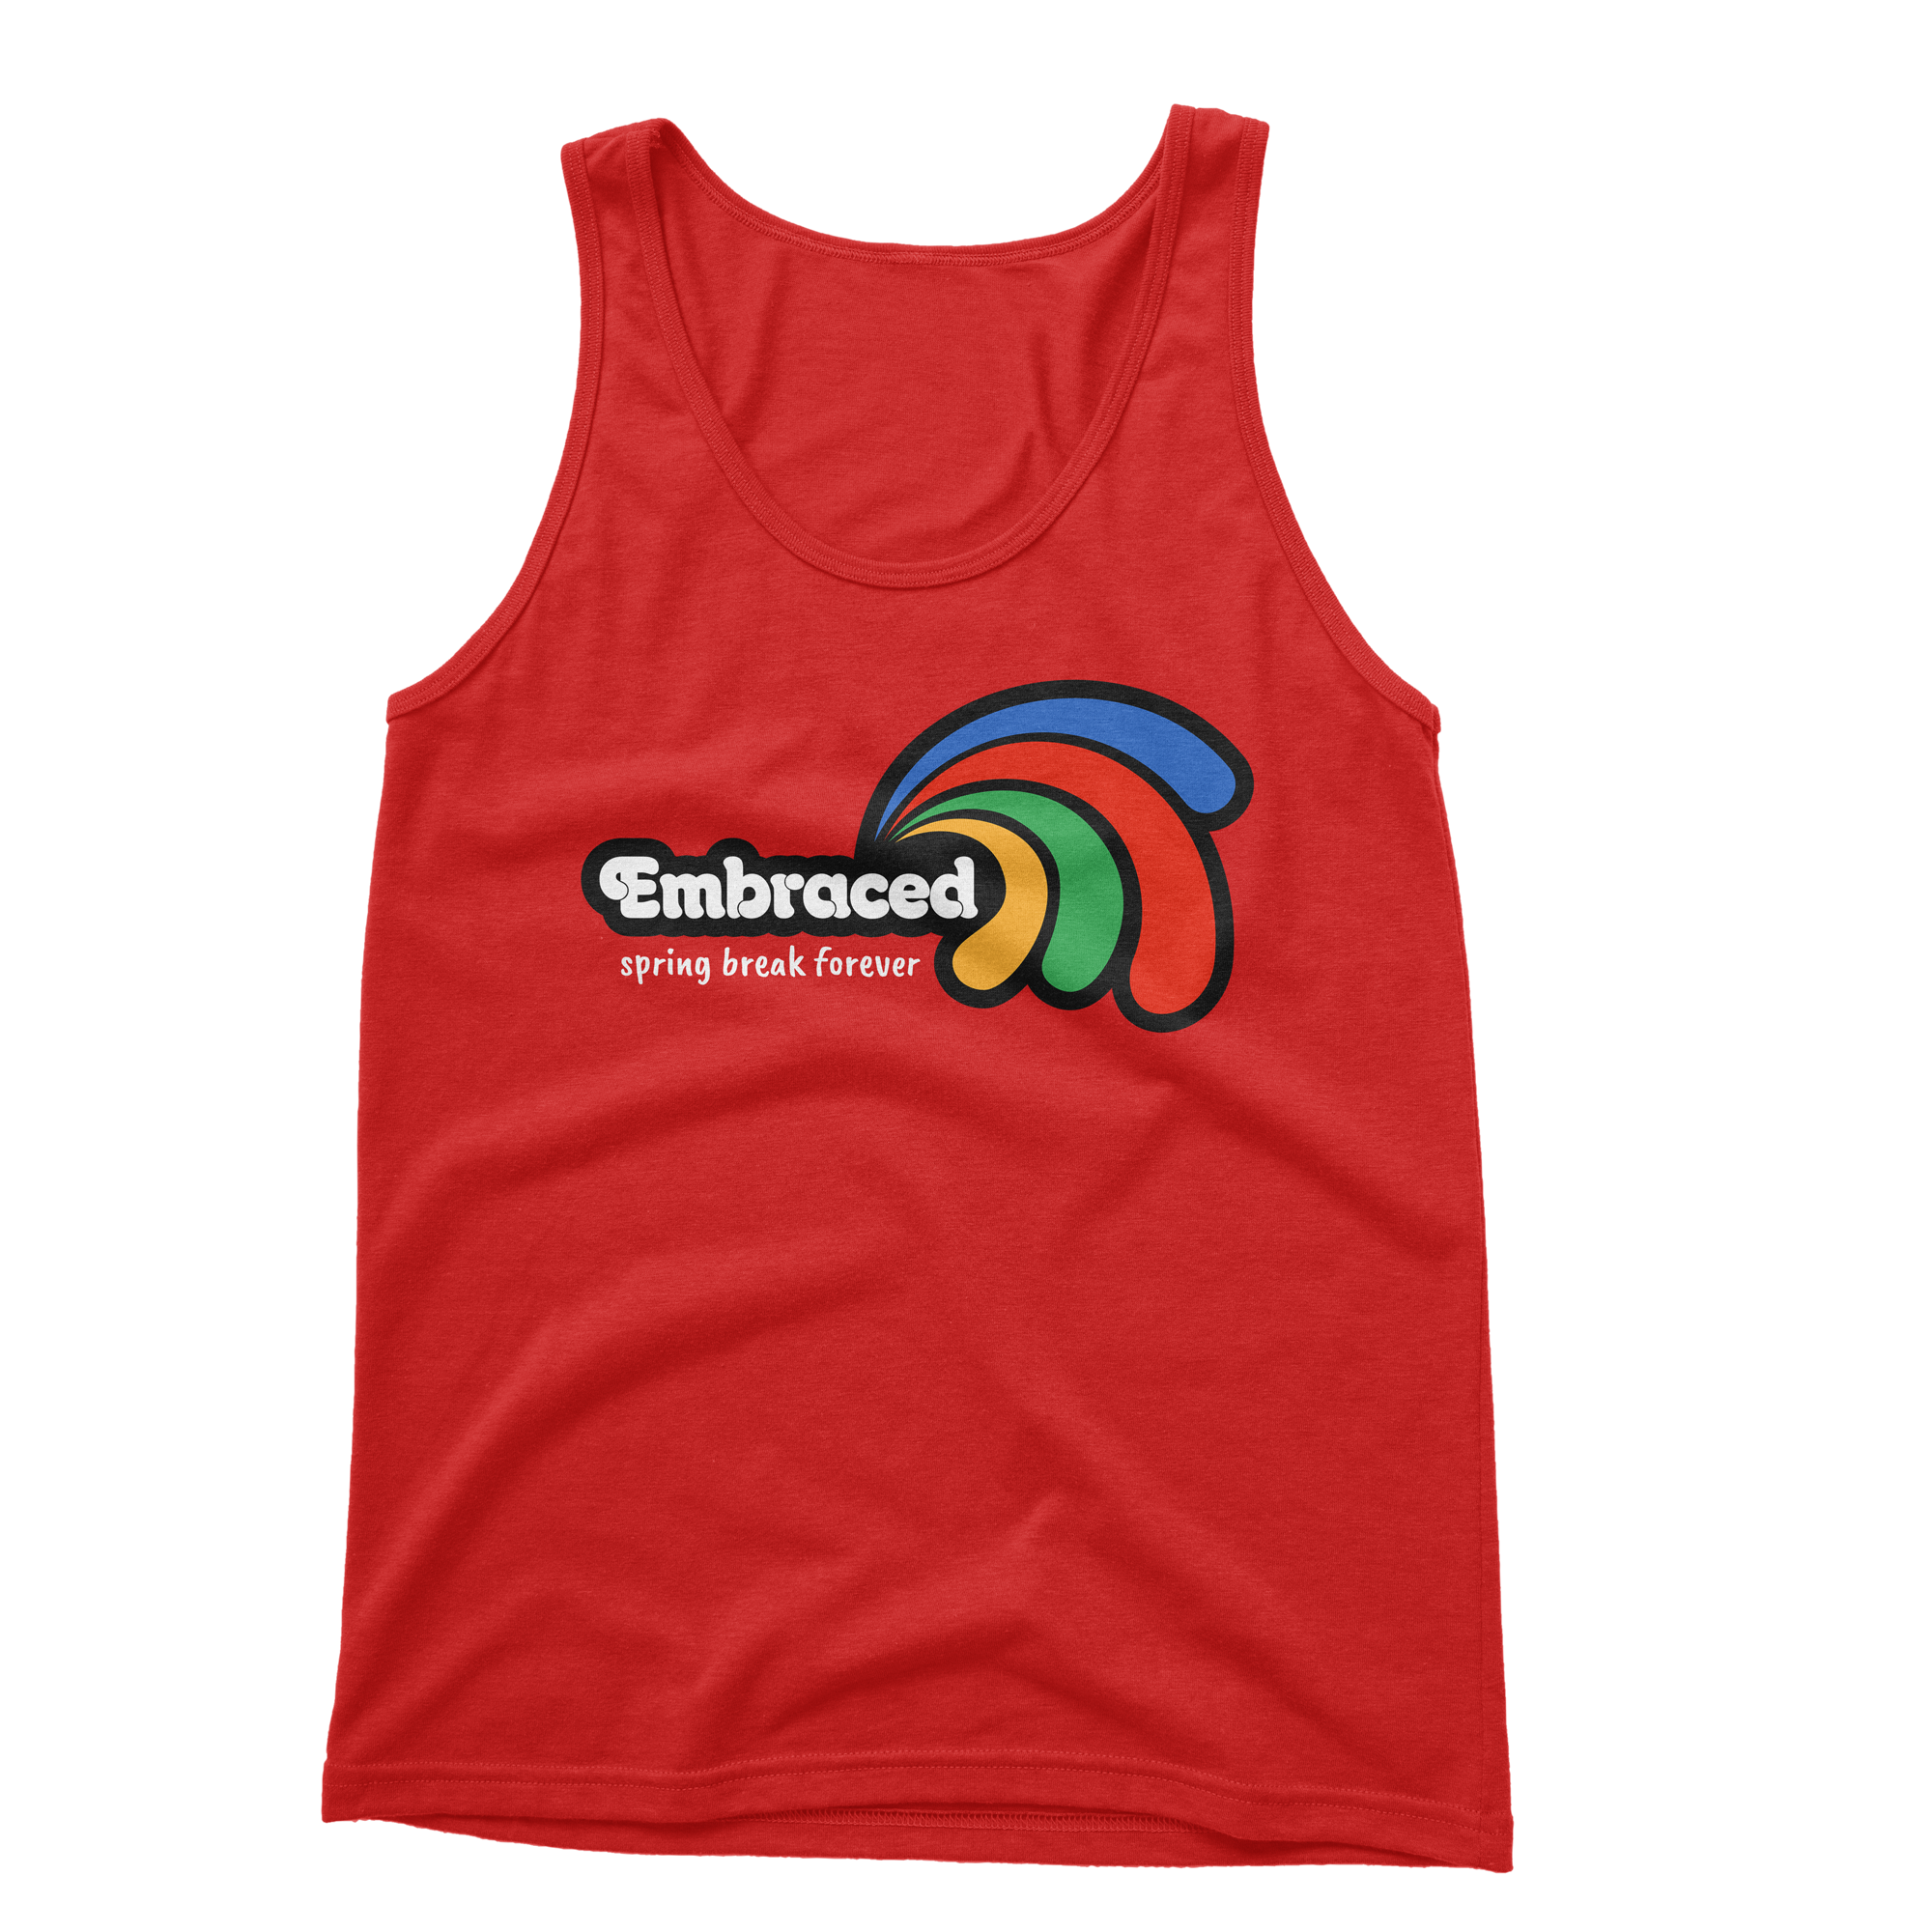 Embraced - Miracle Strip Tank Top